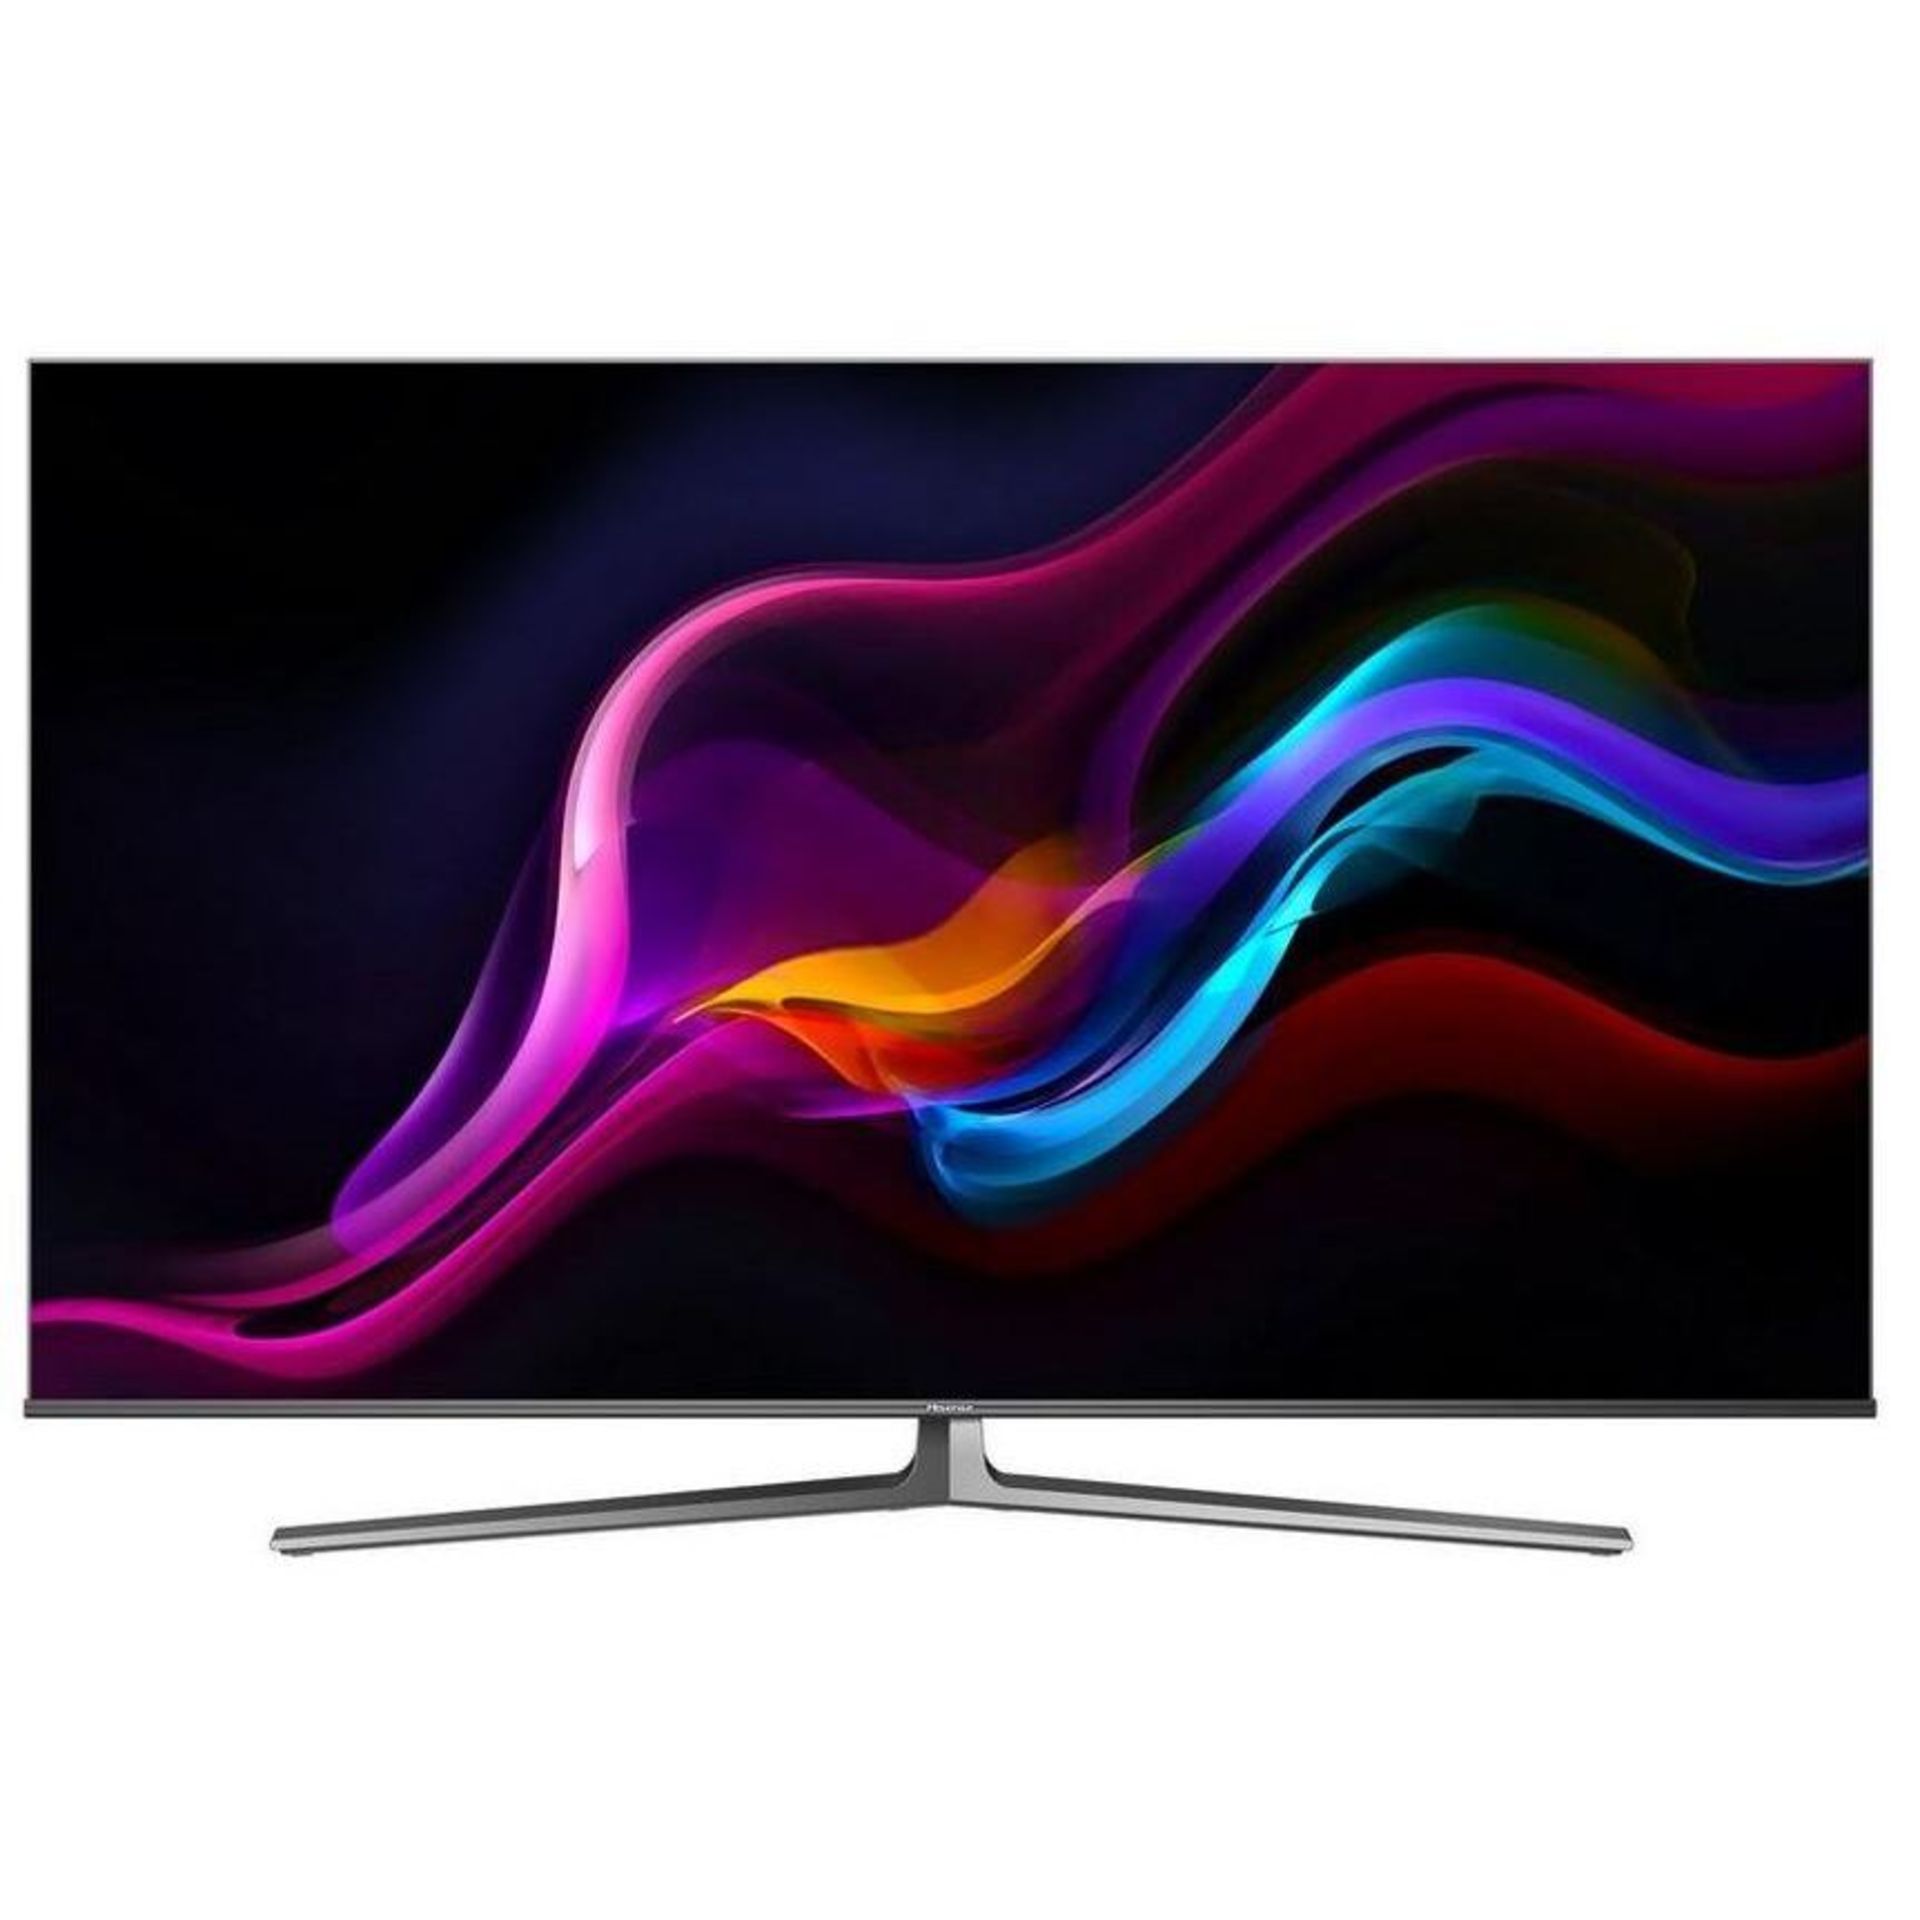 1 HISENSE 55U8GQTUK 55" SMART 4K ULTRA HD HDR QLED TV WITH ALEXA & GOOGLE ASSISTANT WITH STAND AND